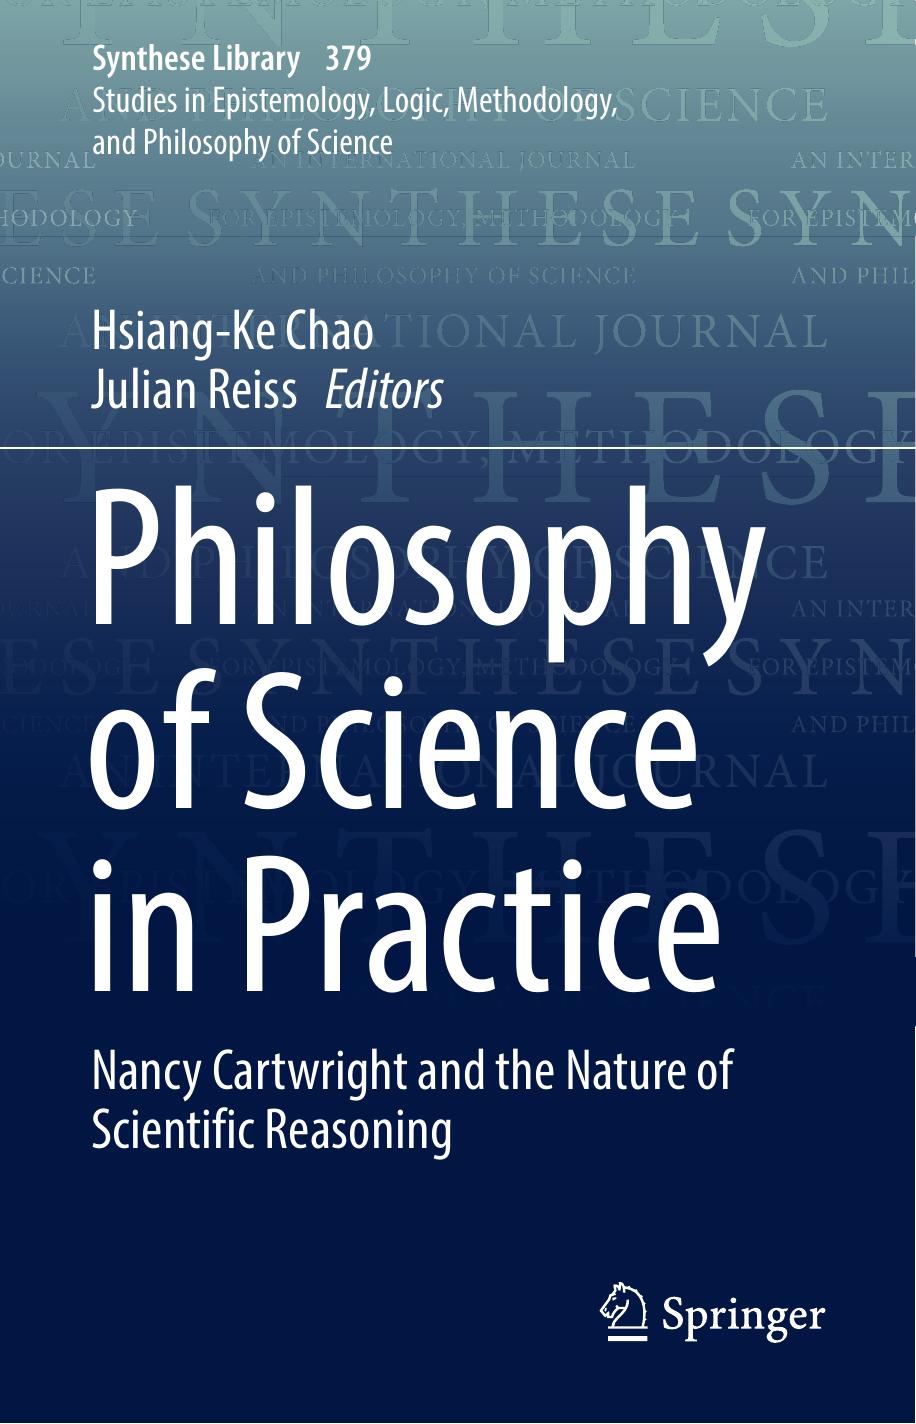 Philosophy of Science in Practice: Nancy Cartwright and the Nature of Scientific Reasoning